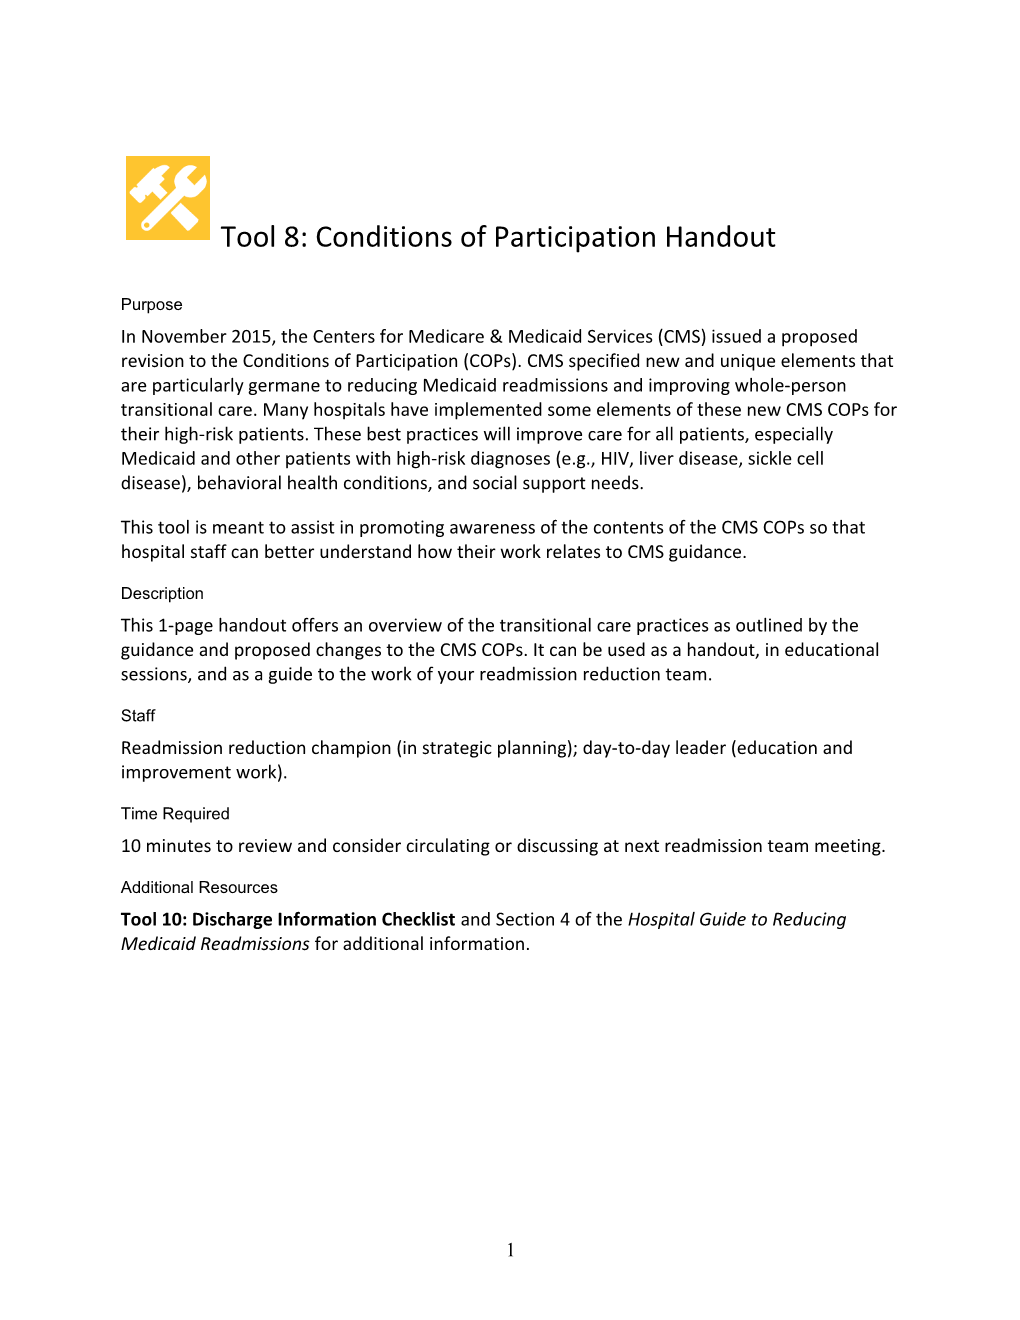 Tool 8: Conditions of Participation Handout